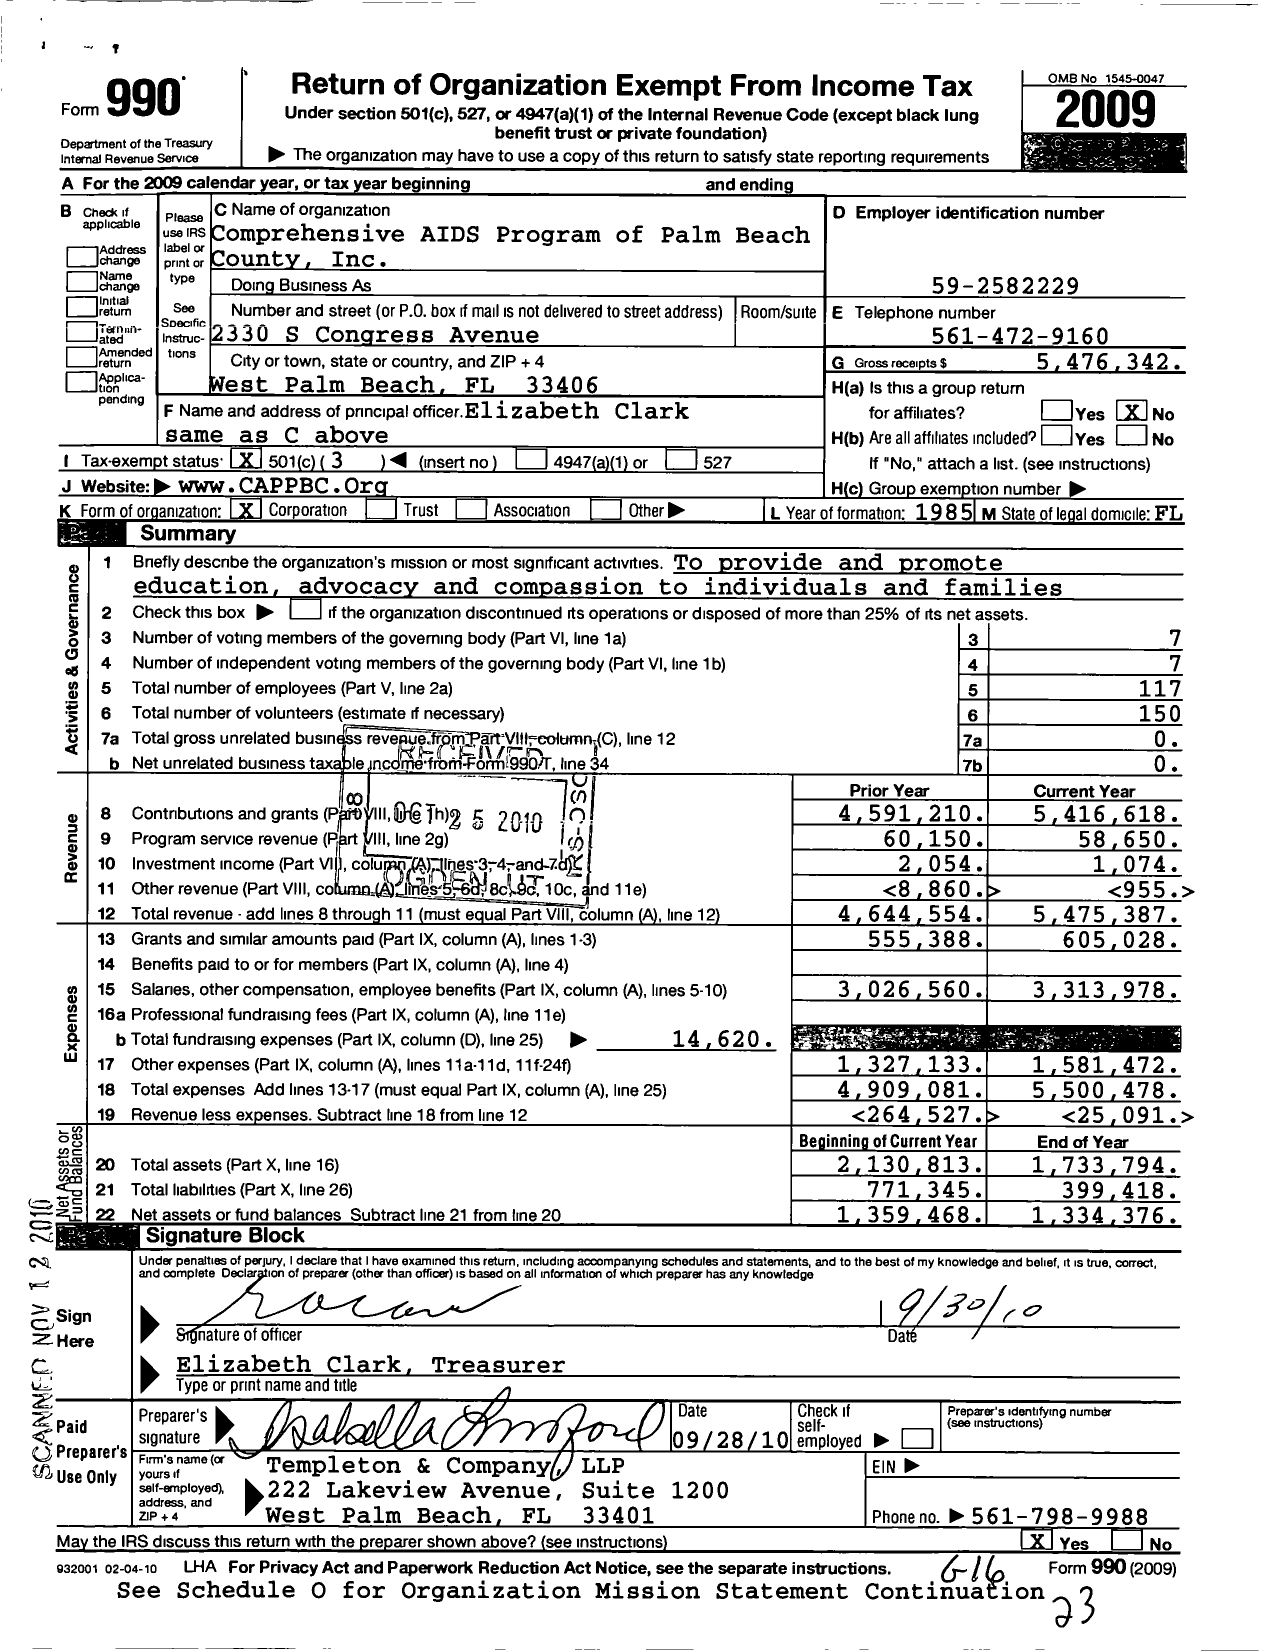 Image of first page of 2009 Form 990 for Comprehensive AIDS Program of Palm Beach County